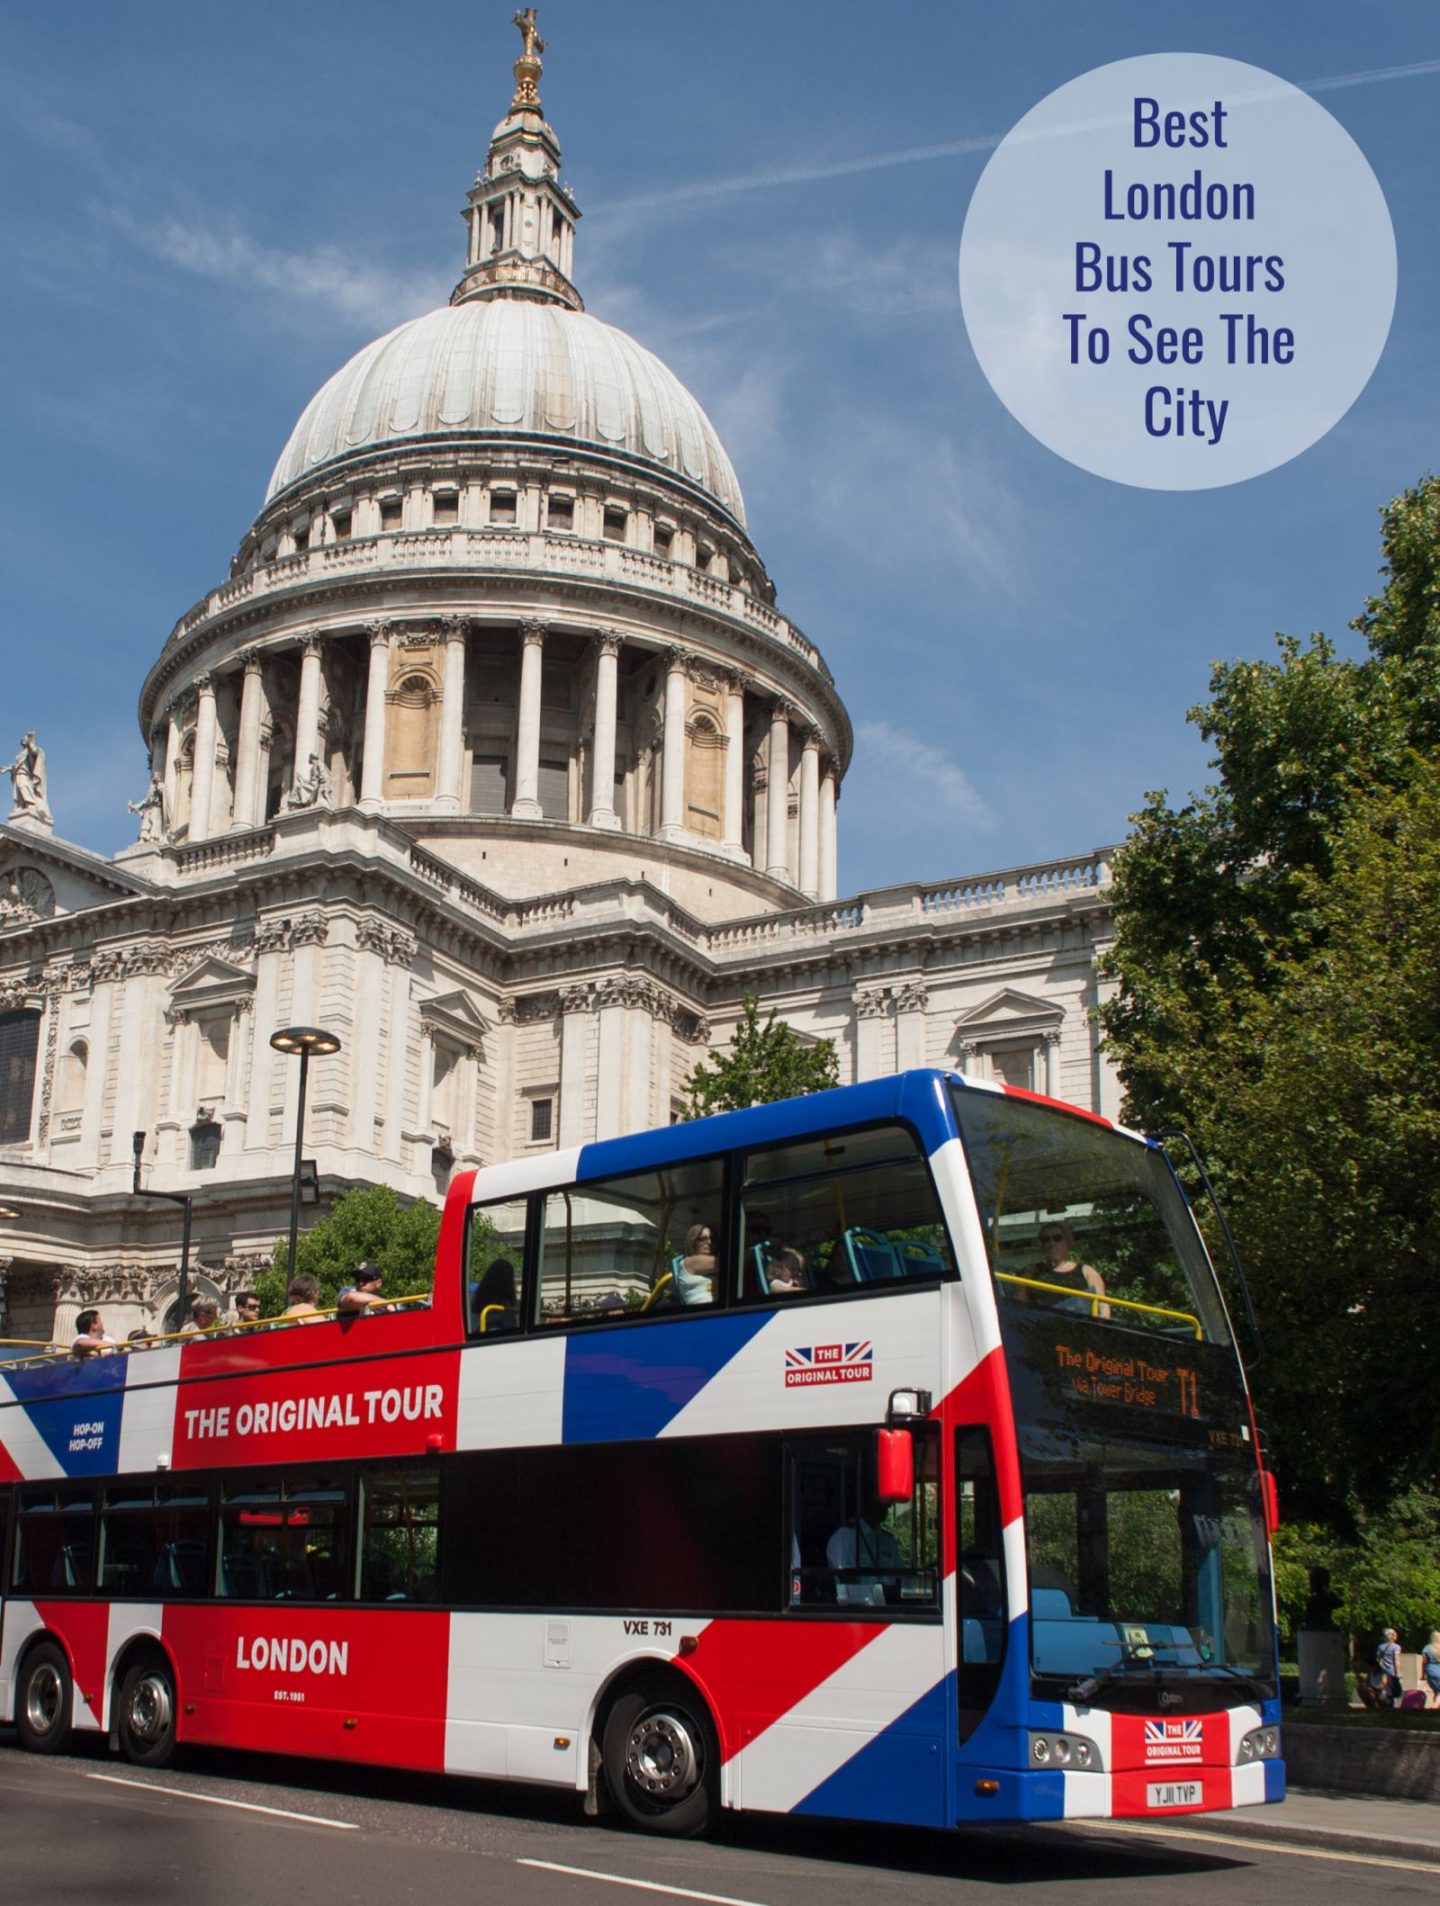 The Best Bus Tours To Take To See London and Get In All The Sights